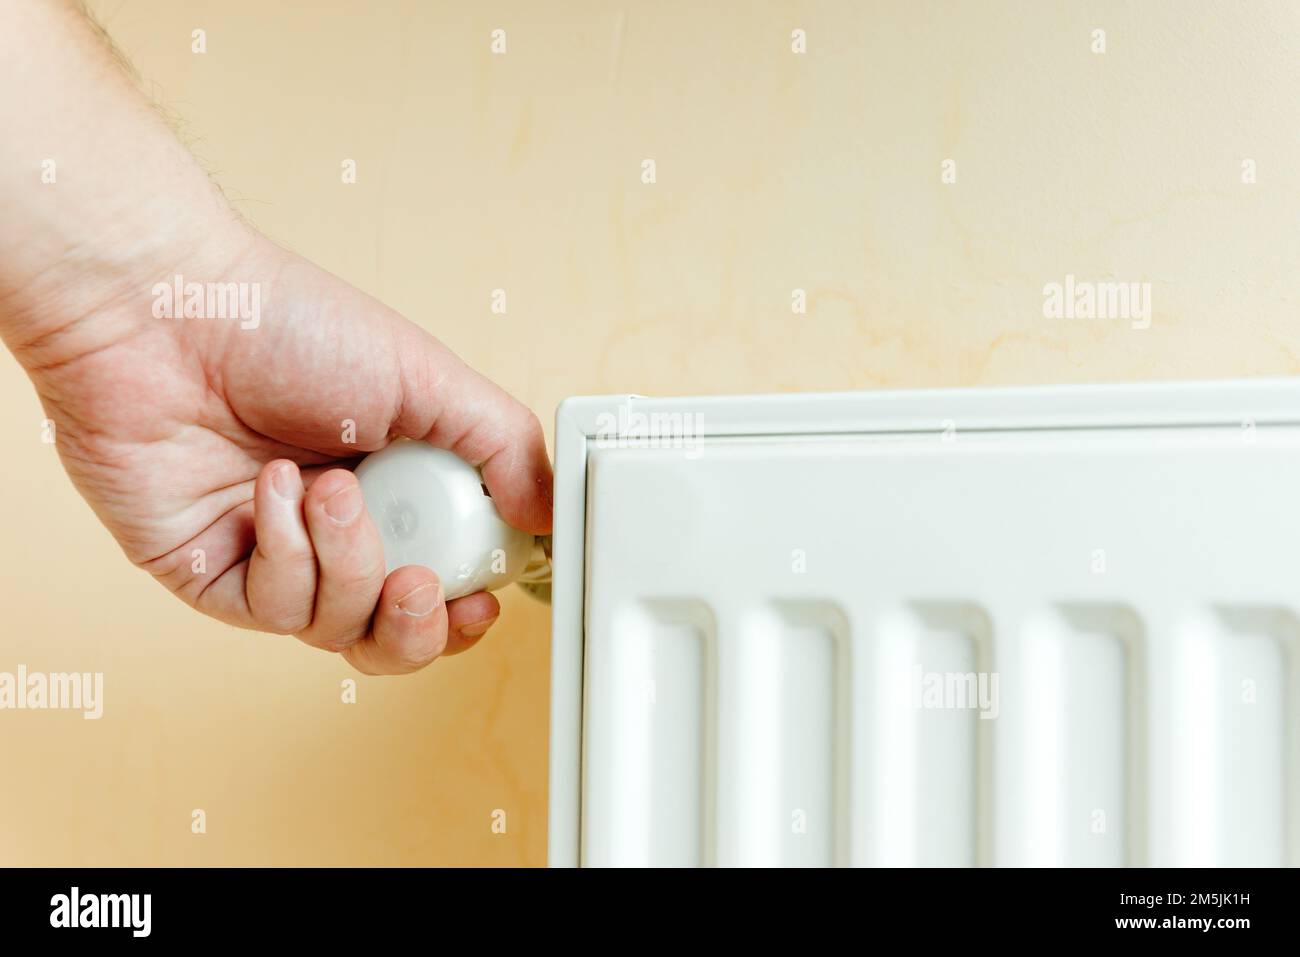 climate optimism and climate Control . A man switches the temperature on the batteries. Saves heat. Protects the environment. Stock Photo